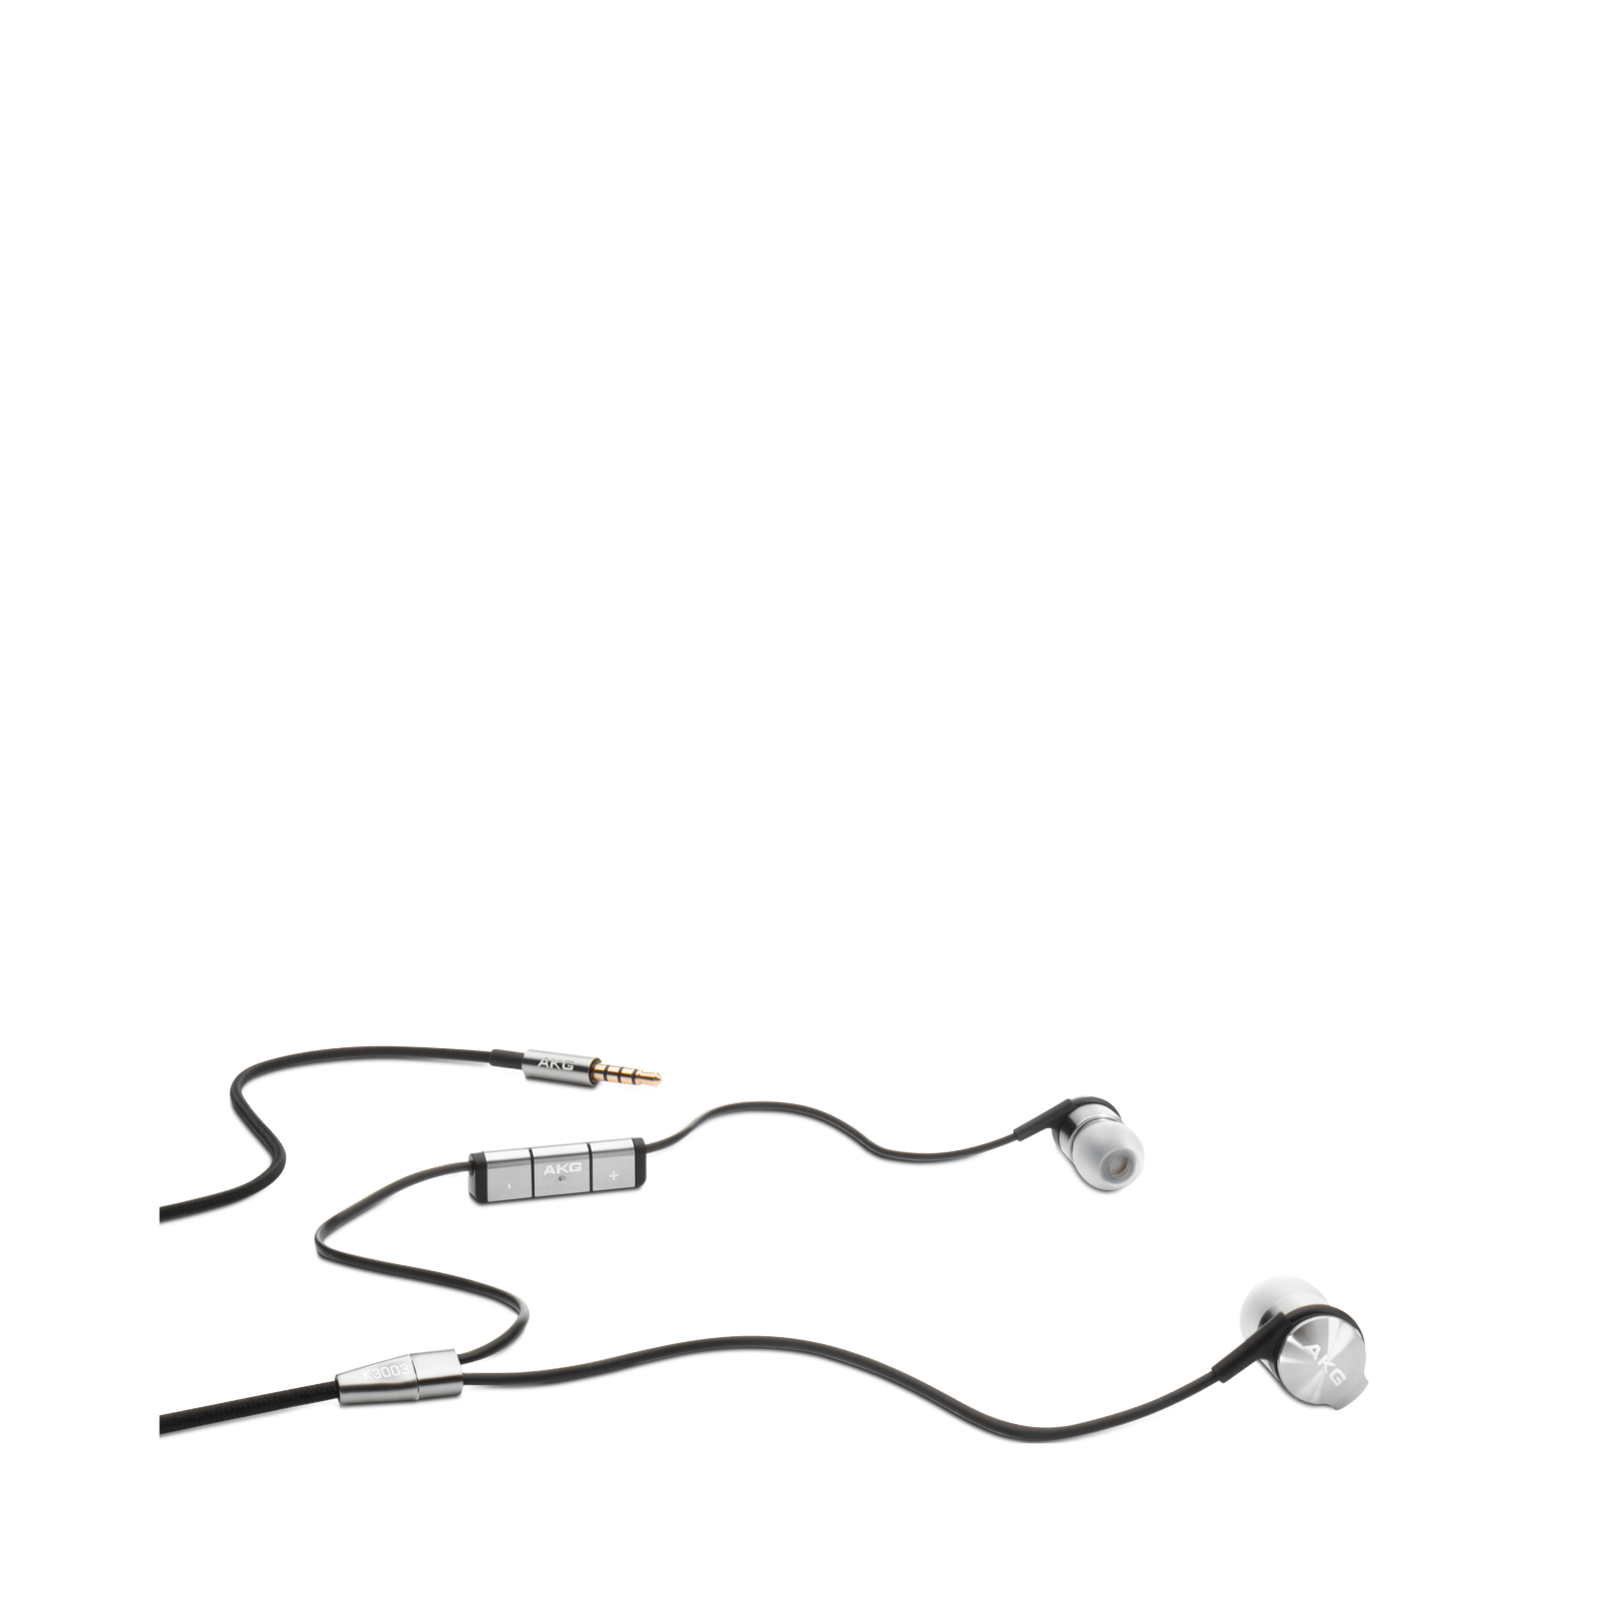 K3003i - Aluminum - Reference class 3-way earphones with integrated microphone and remote. - Hero